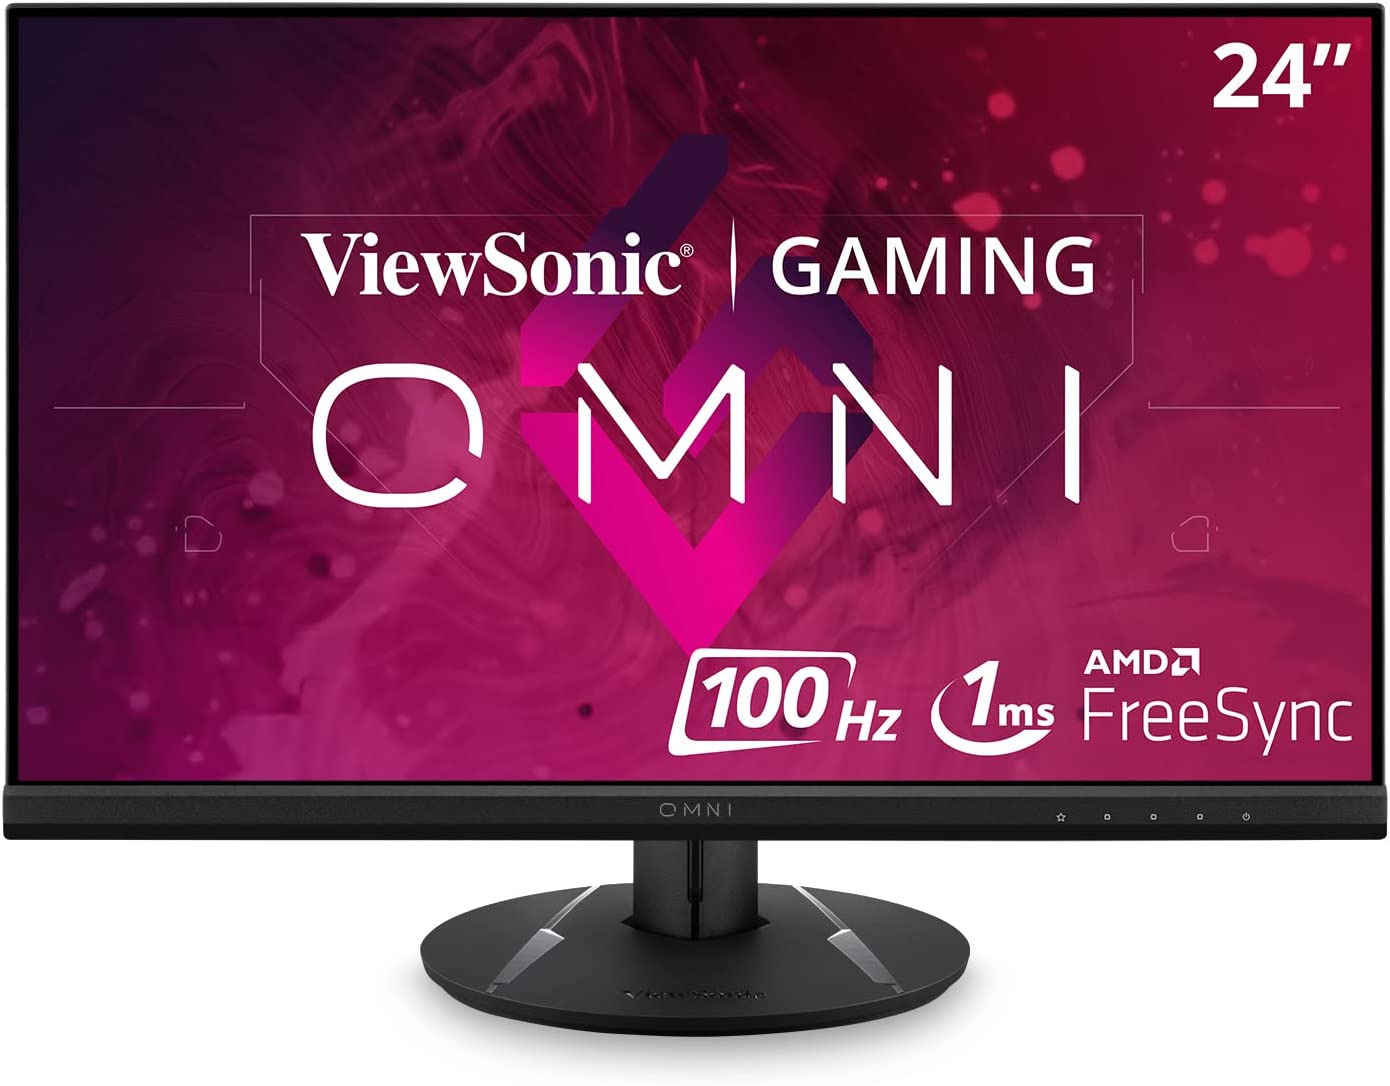 Omni VX2416 24 Inch 1080P 1Ms 100Hz Gaming Monitor with IPS Panel, AMD Freesync,